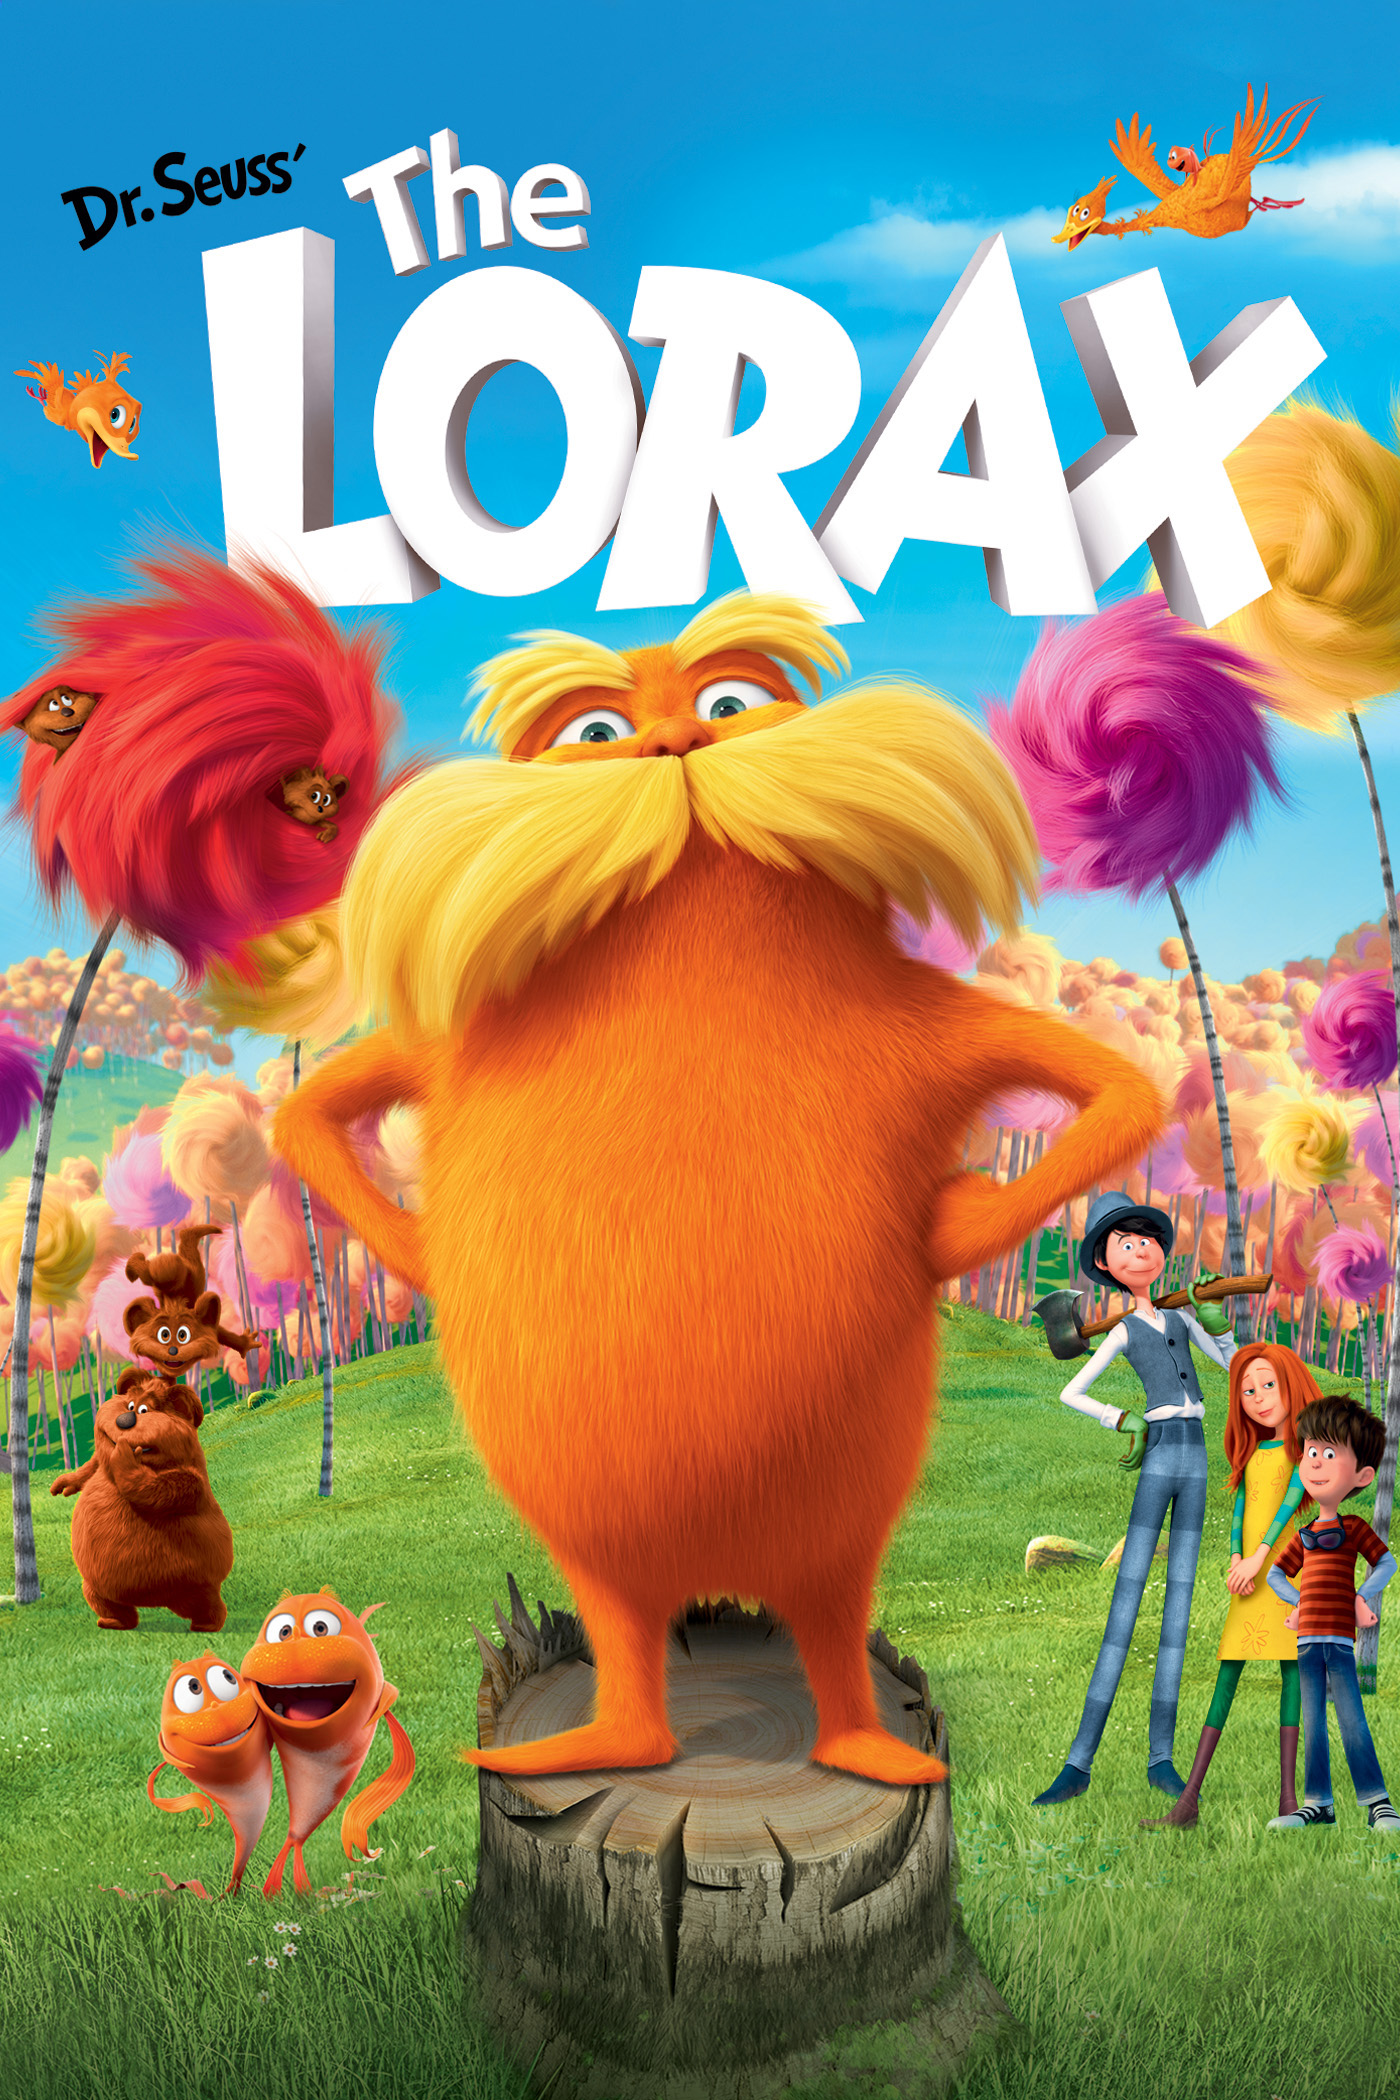 Dr Seuss The Lorax 2012 - Rotten Tomatoes